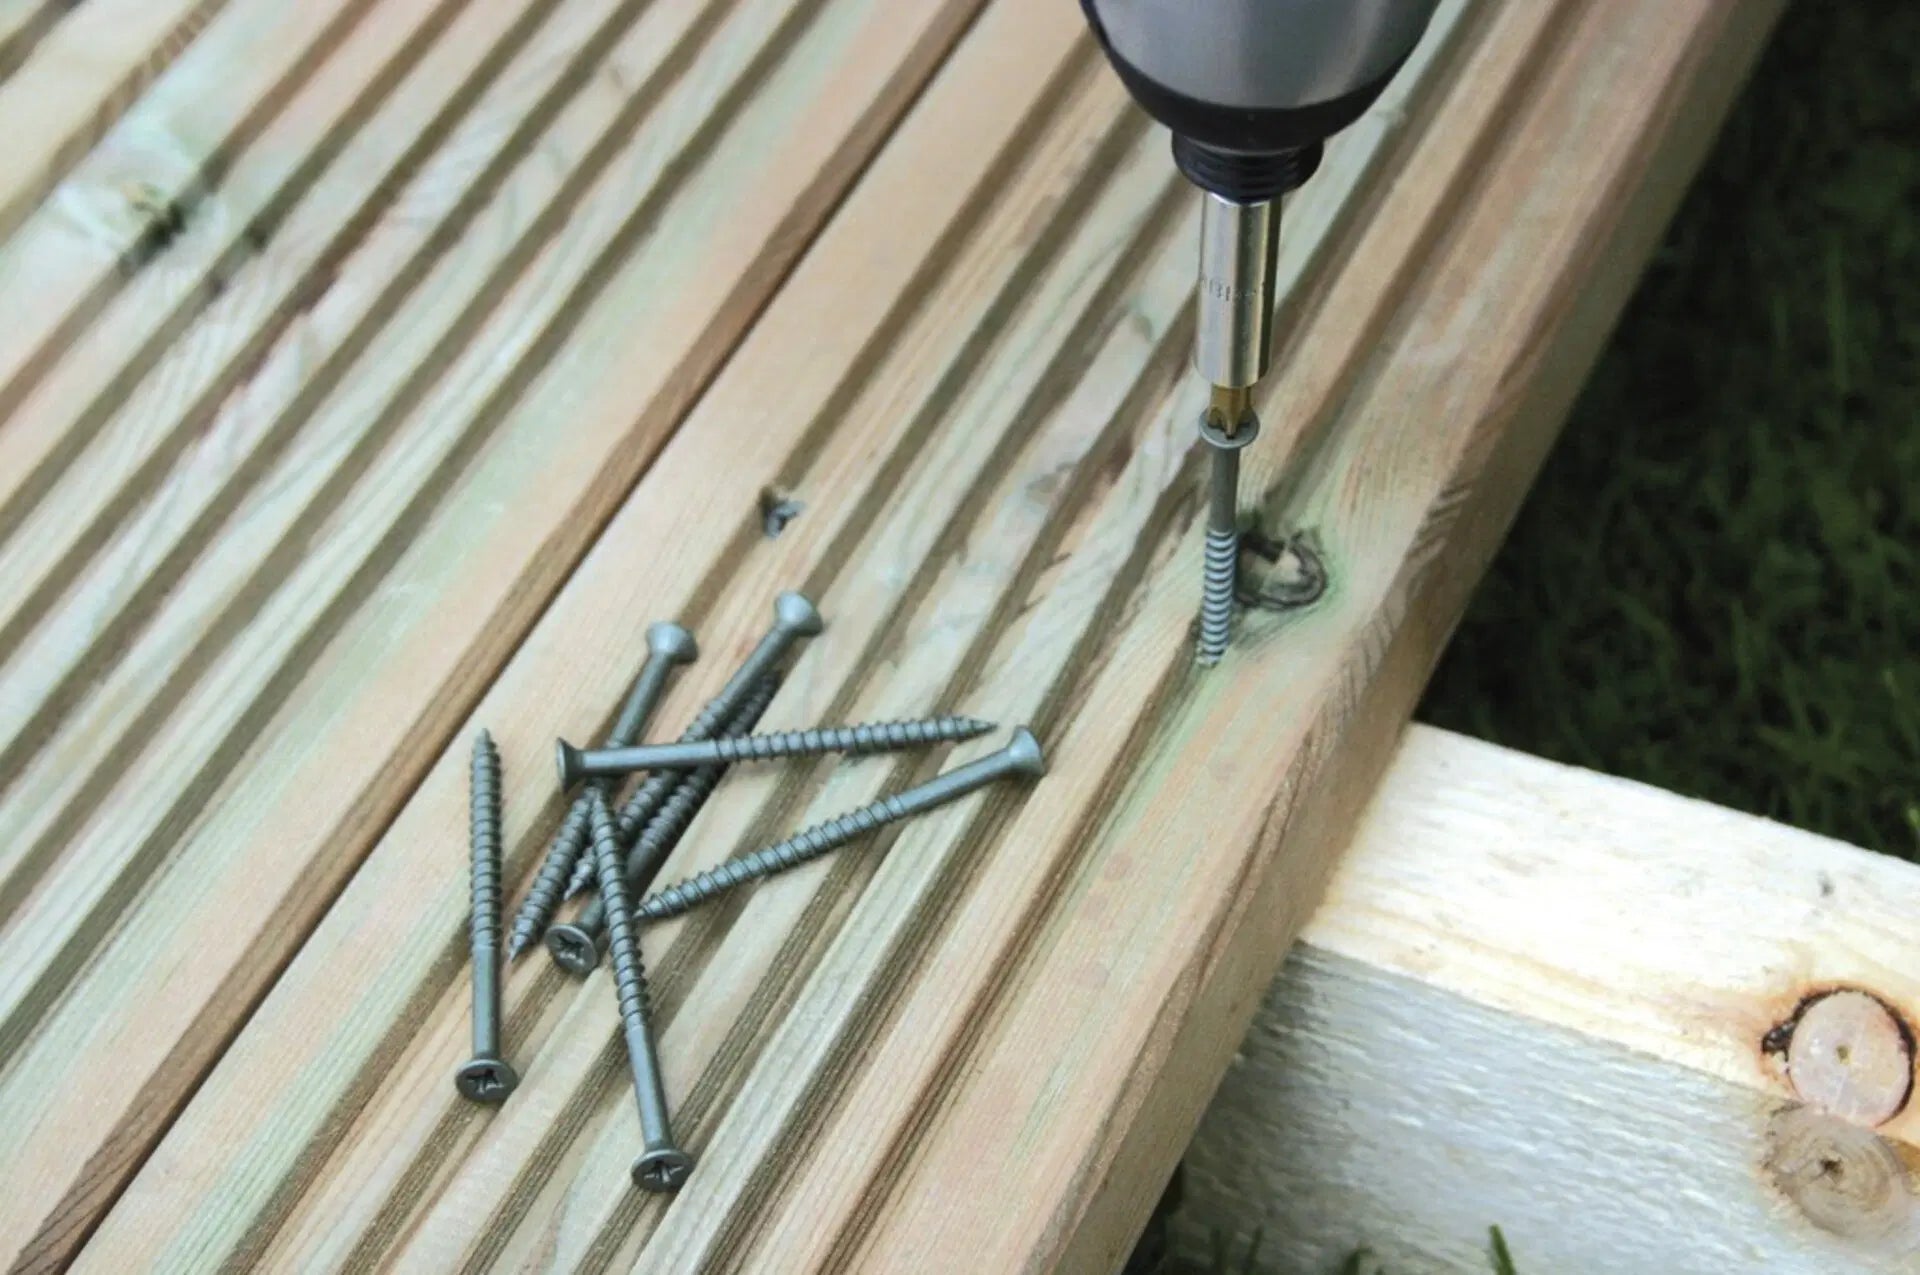 Power 16ft Wooden Decking Kits